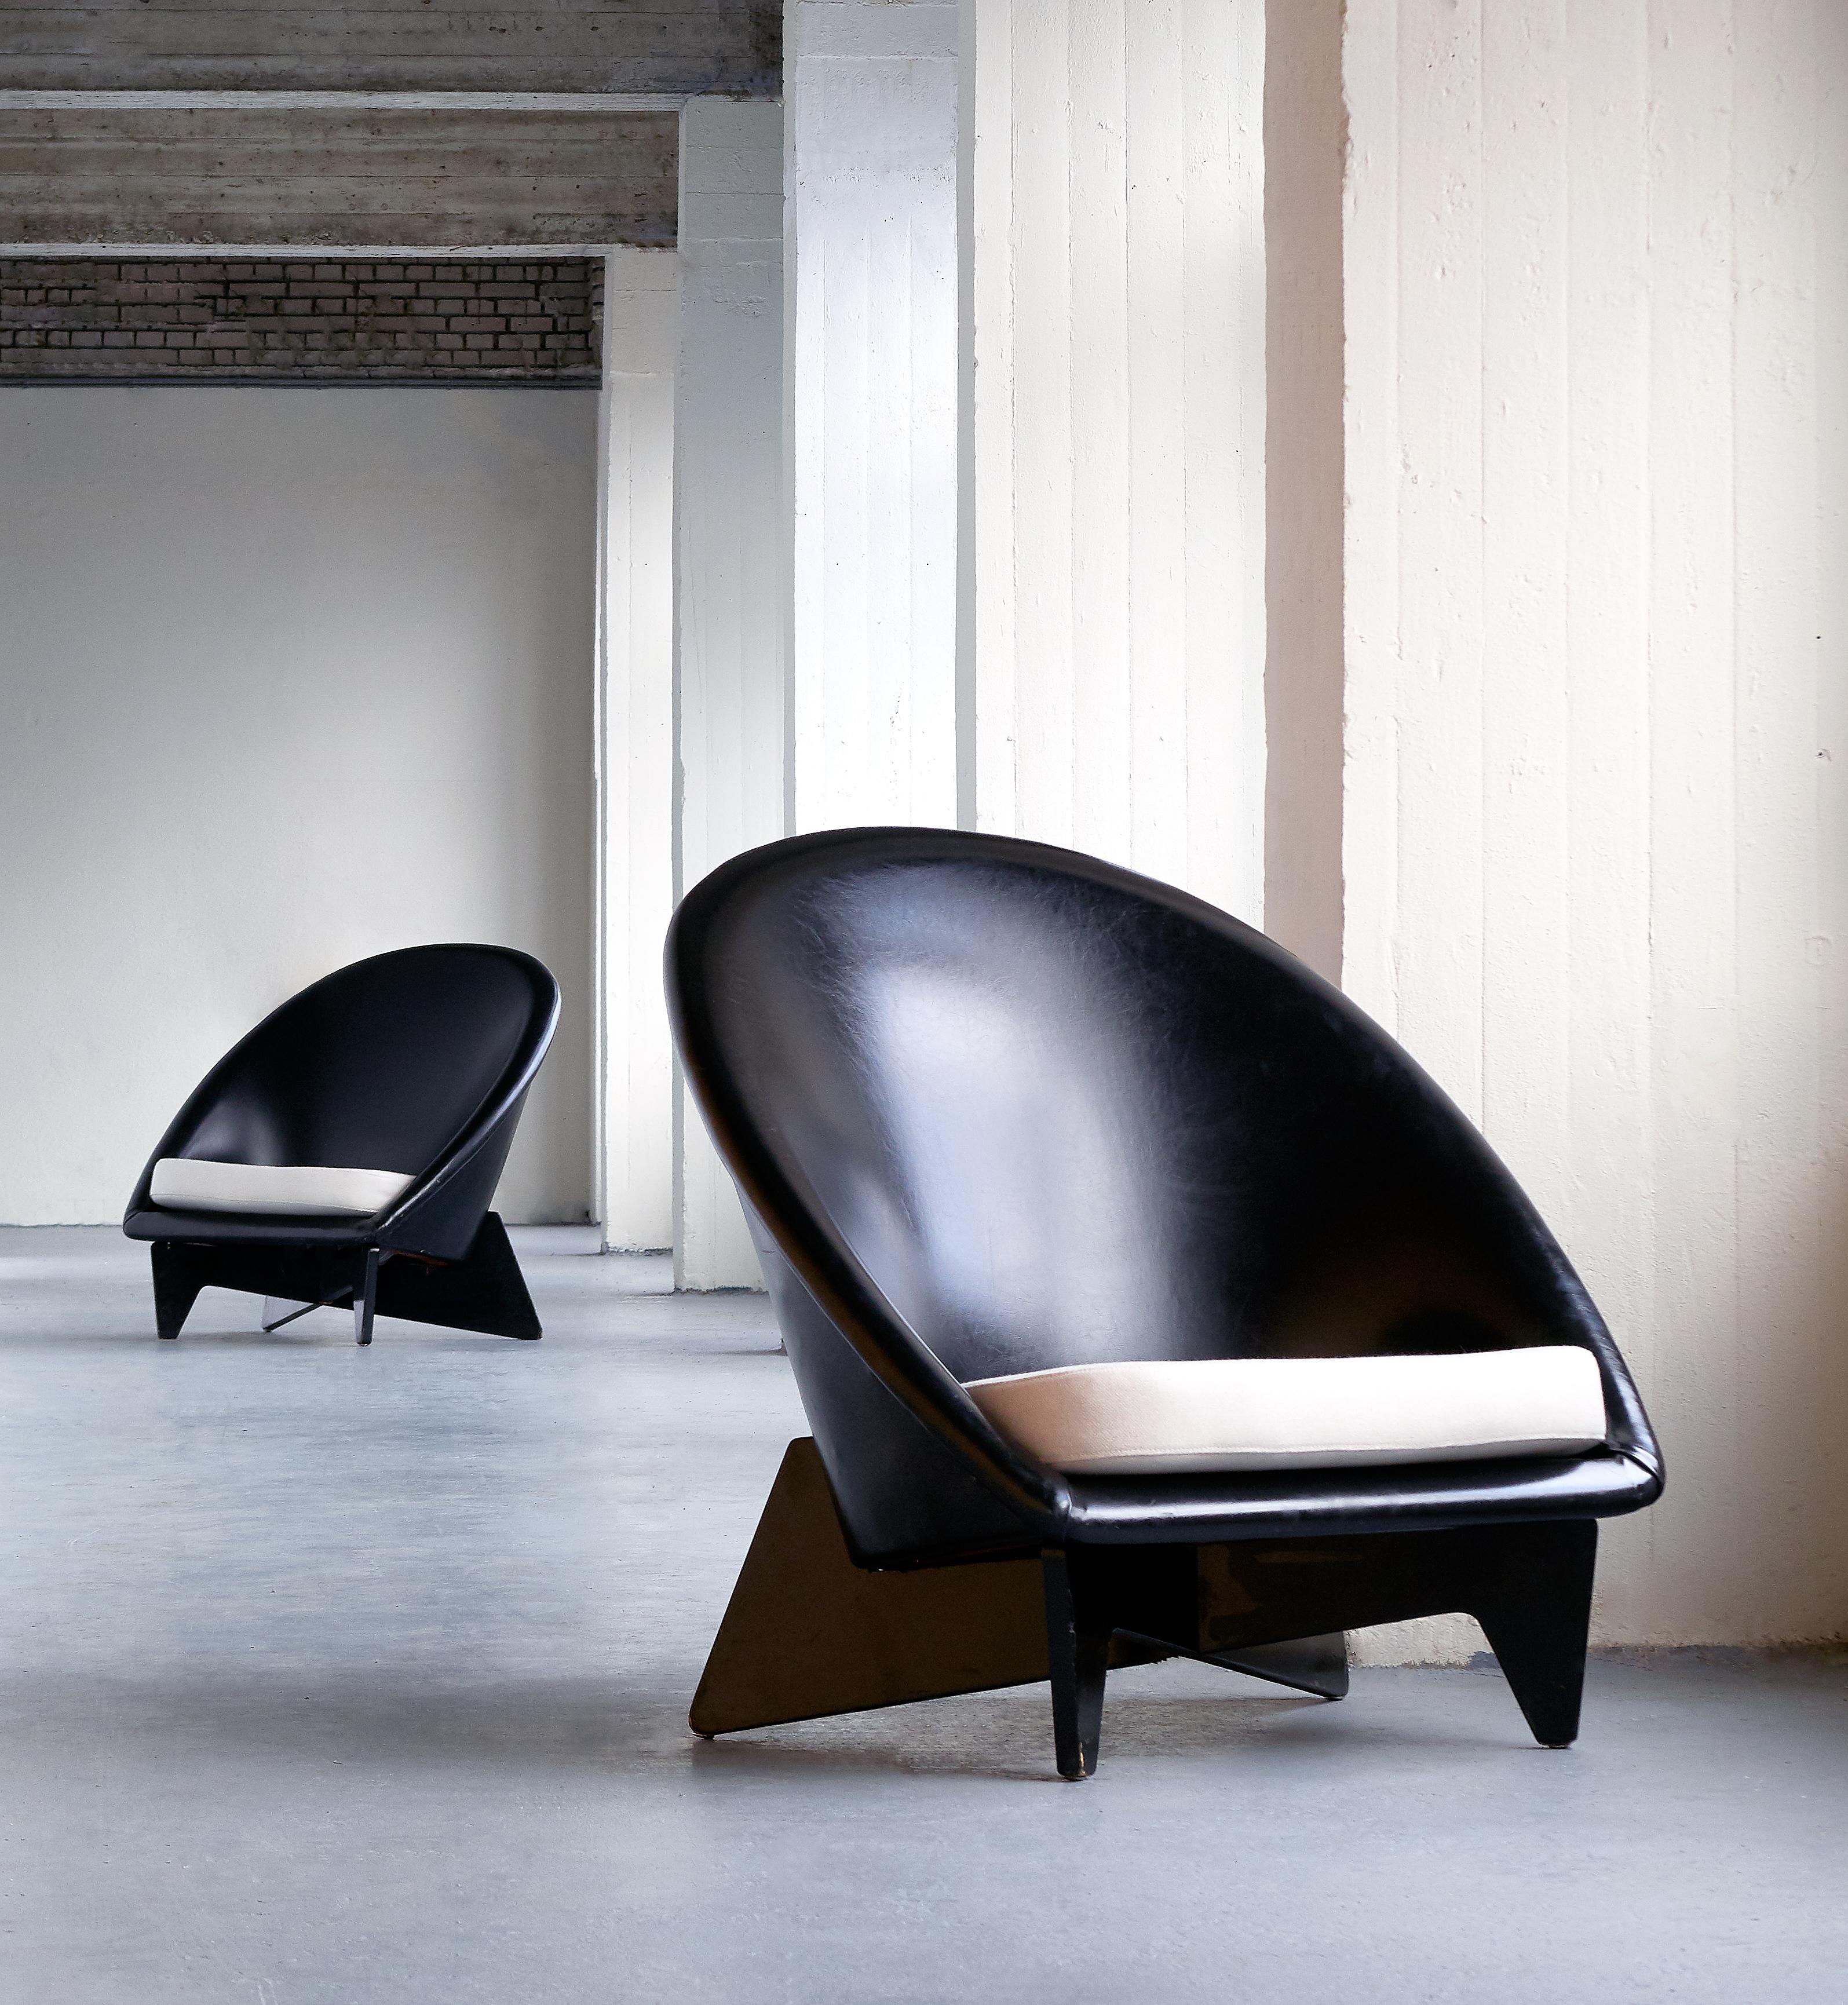 This exceptionally rare pair of lounge chairs was designed by Antti Nurmesniemi for the Palace Hotel in Helsinki in 1952. The chairs were a custom commission to furnish the lobby and other public spaces of the modernist hotel interior.
The organic